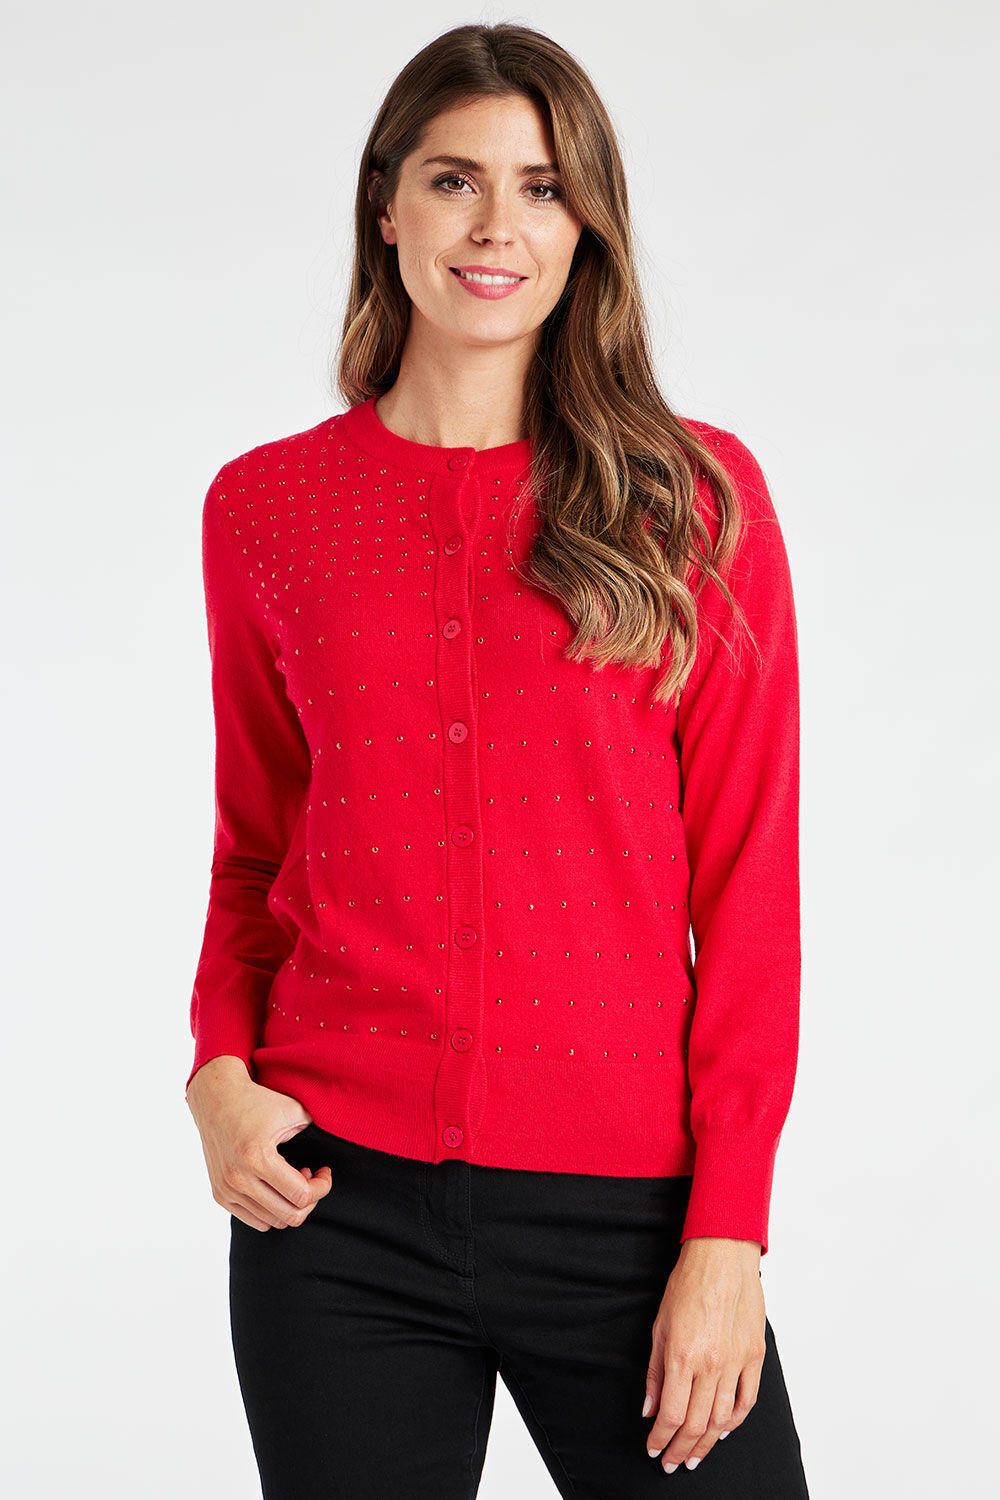 Bonmarche Women’s Red Viscose Stud Front Cardigan with a Button Through Design, Size: 10